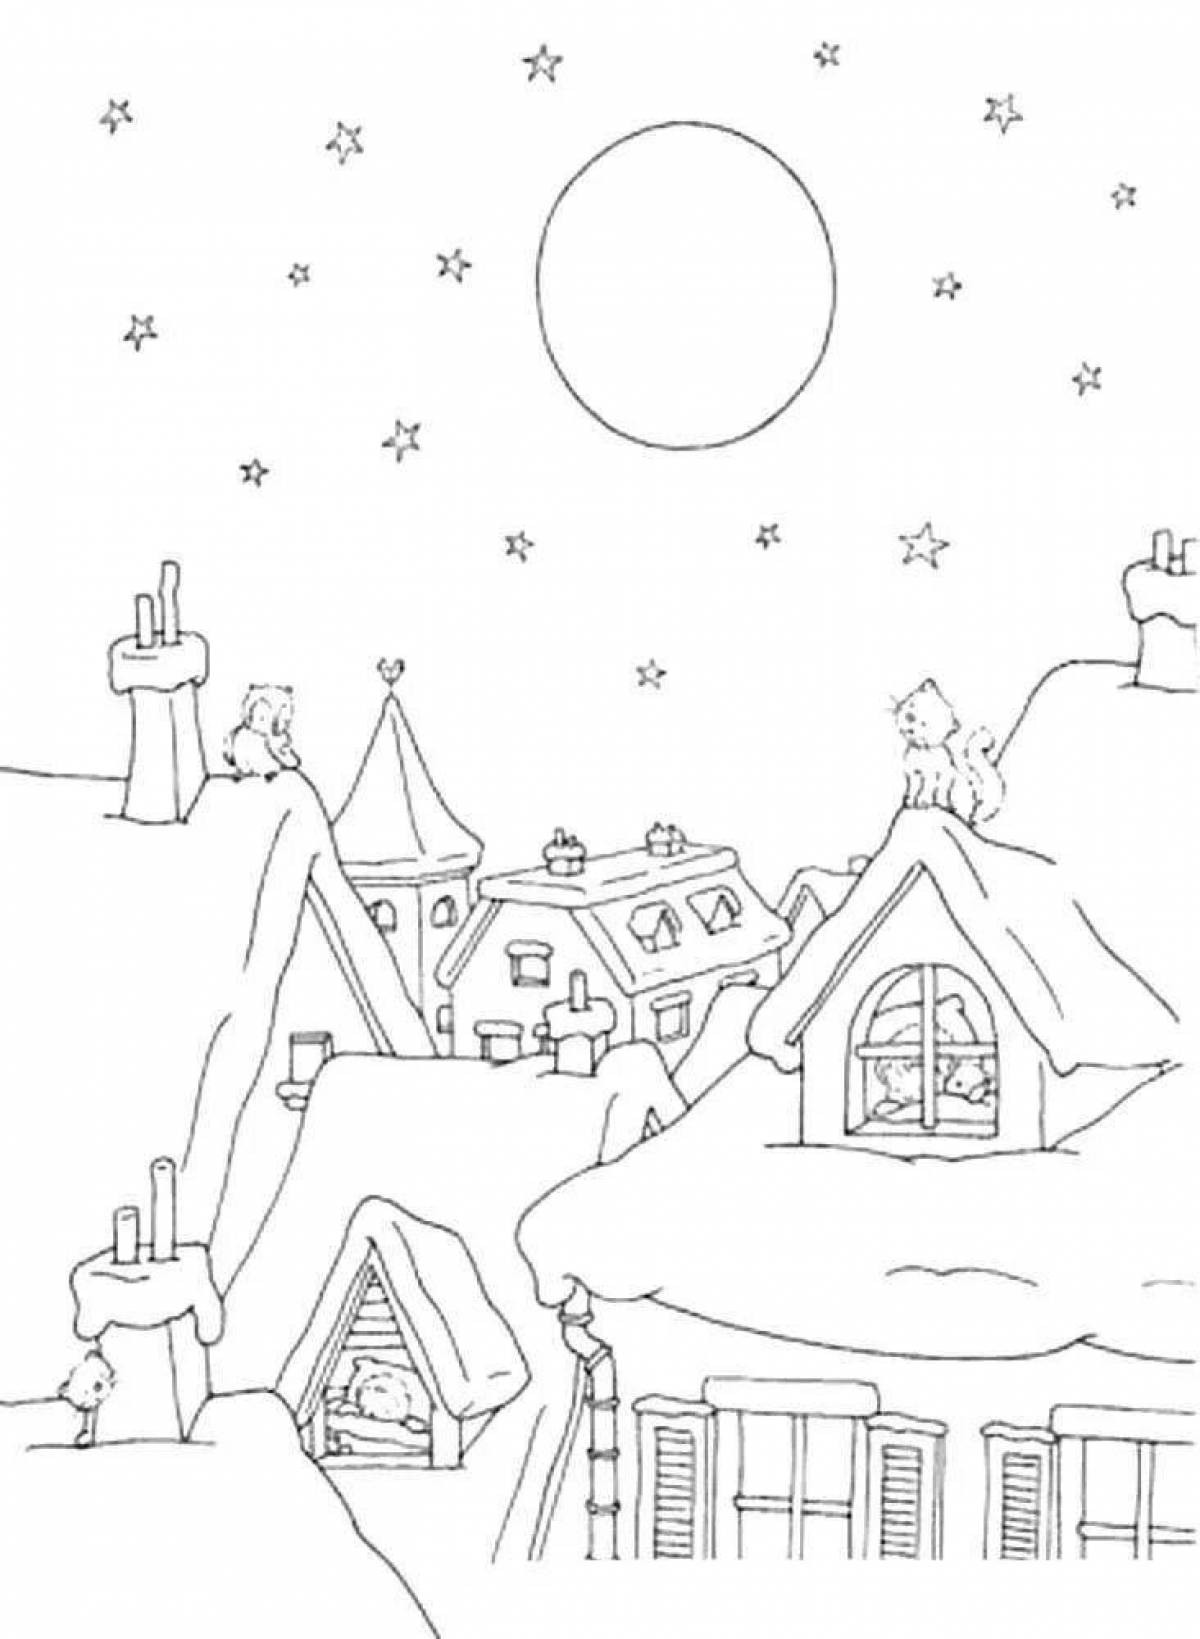 Starry night coloring page